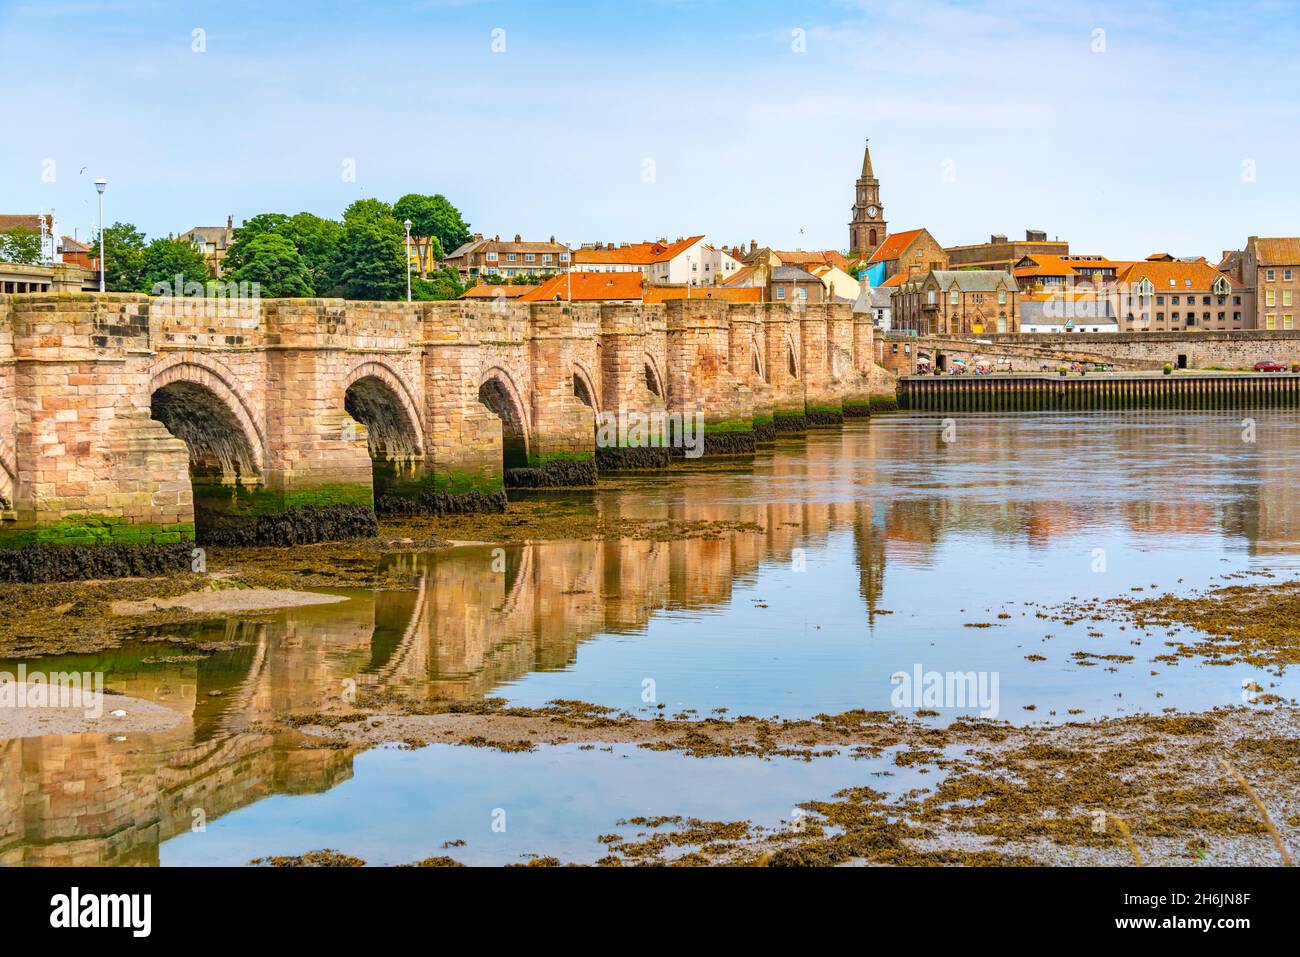 View of River Tweed and town buildings, Berwick-upon-Tweed, Northumberland, England, United Kingdom, Europe Stock Photo